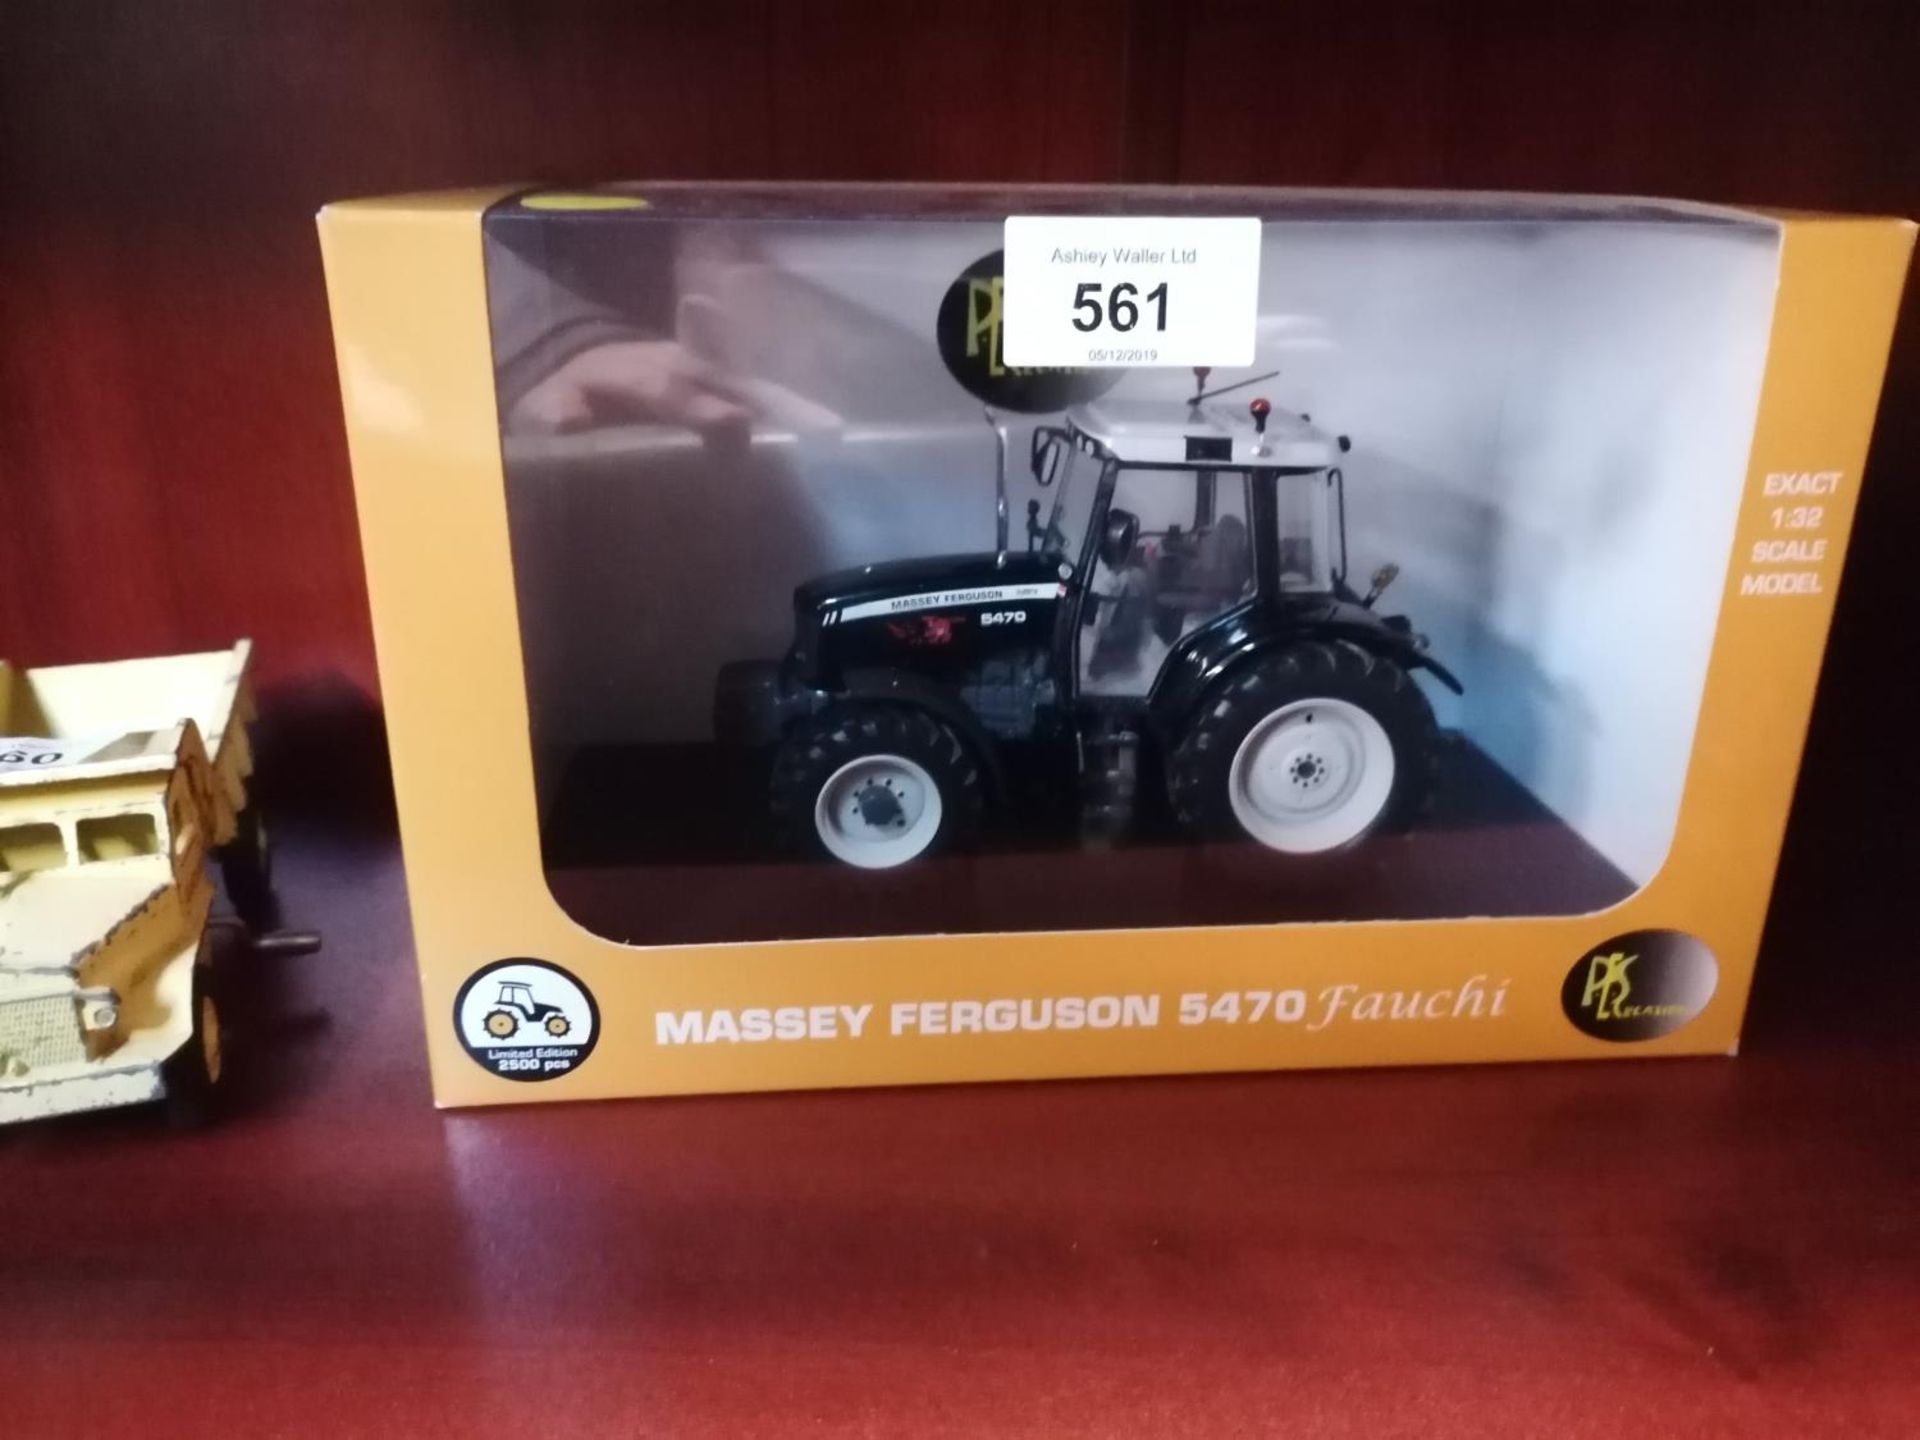 A BOXED UNIVERSAL HOBBIES MASSEY FERGUSON 5470 1:32 SCALE FAUCHI TRACTOR MODEL - Image 2 of 2